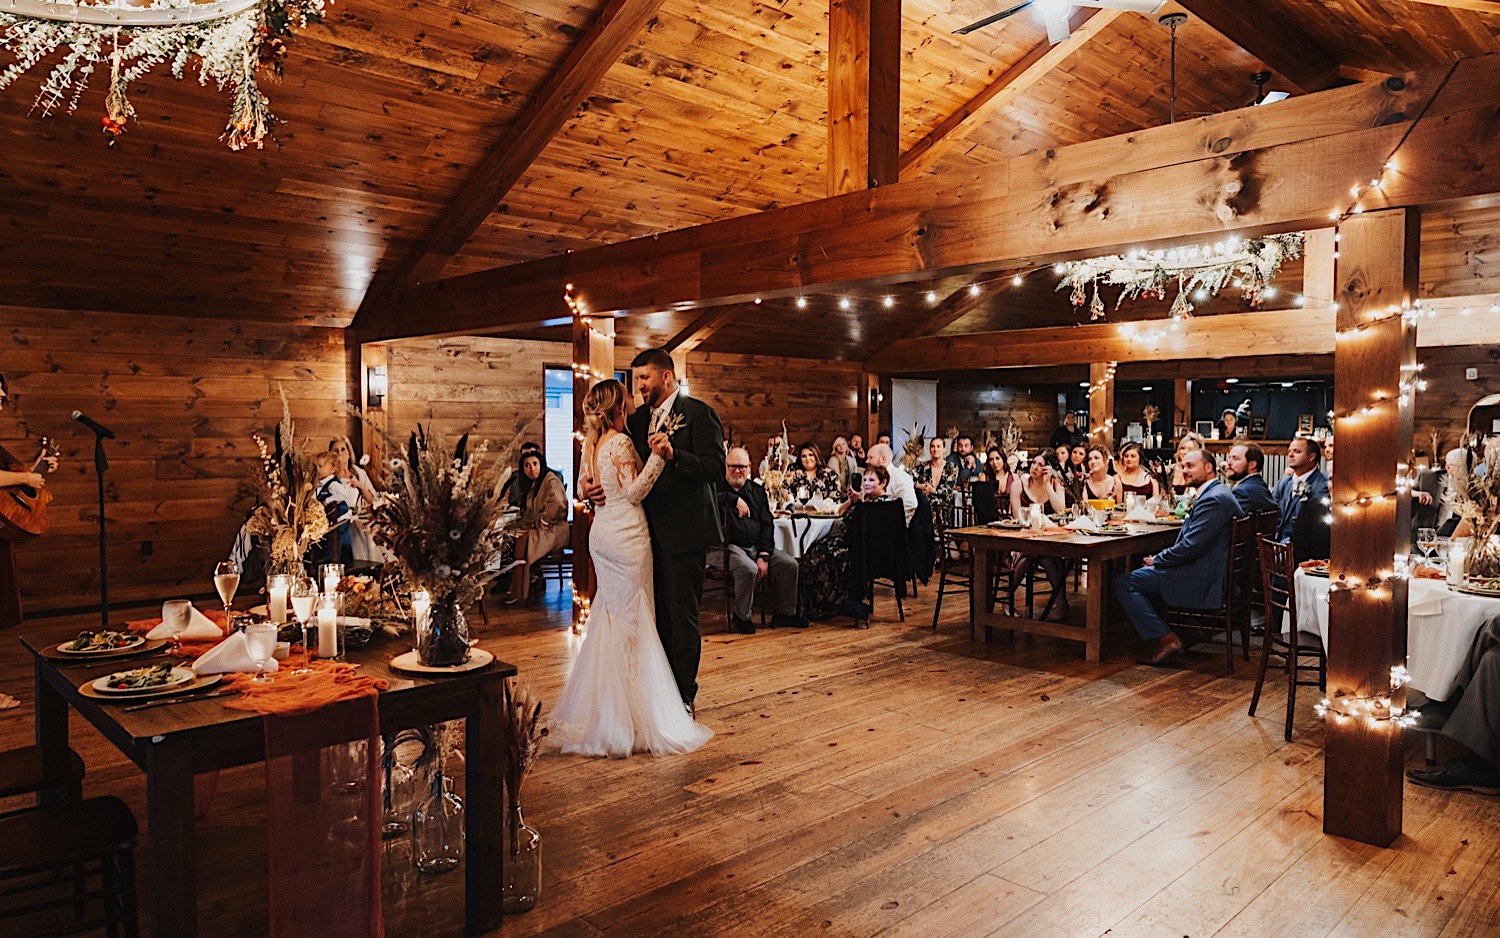 Guests watch while a bride and groom share a first dance together during their indoor wedding reception at Lake Bomoseen Lodge in Vermont